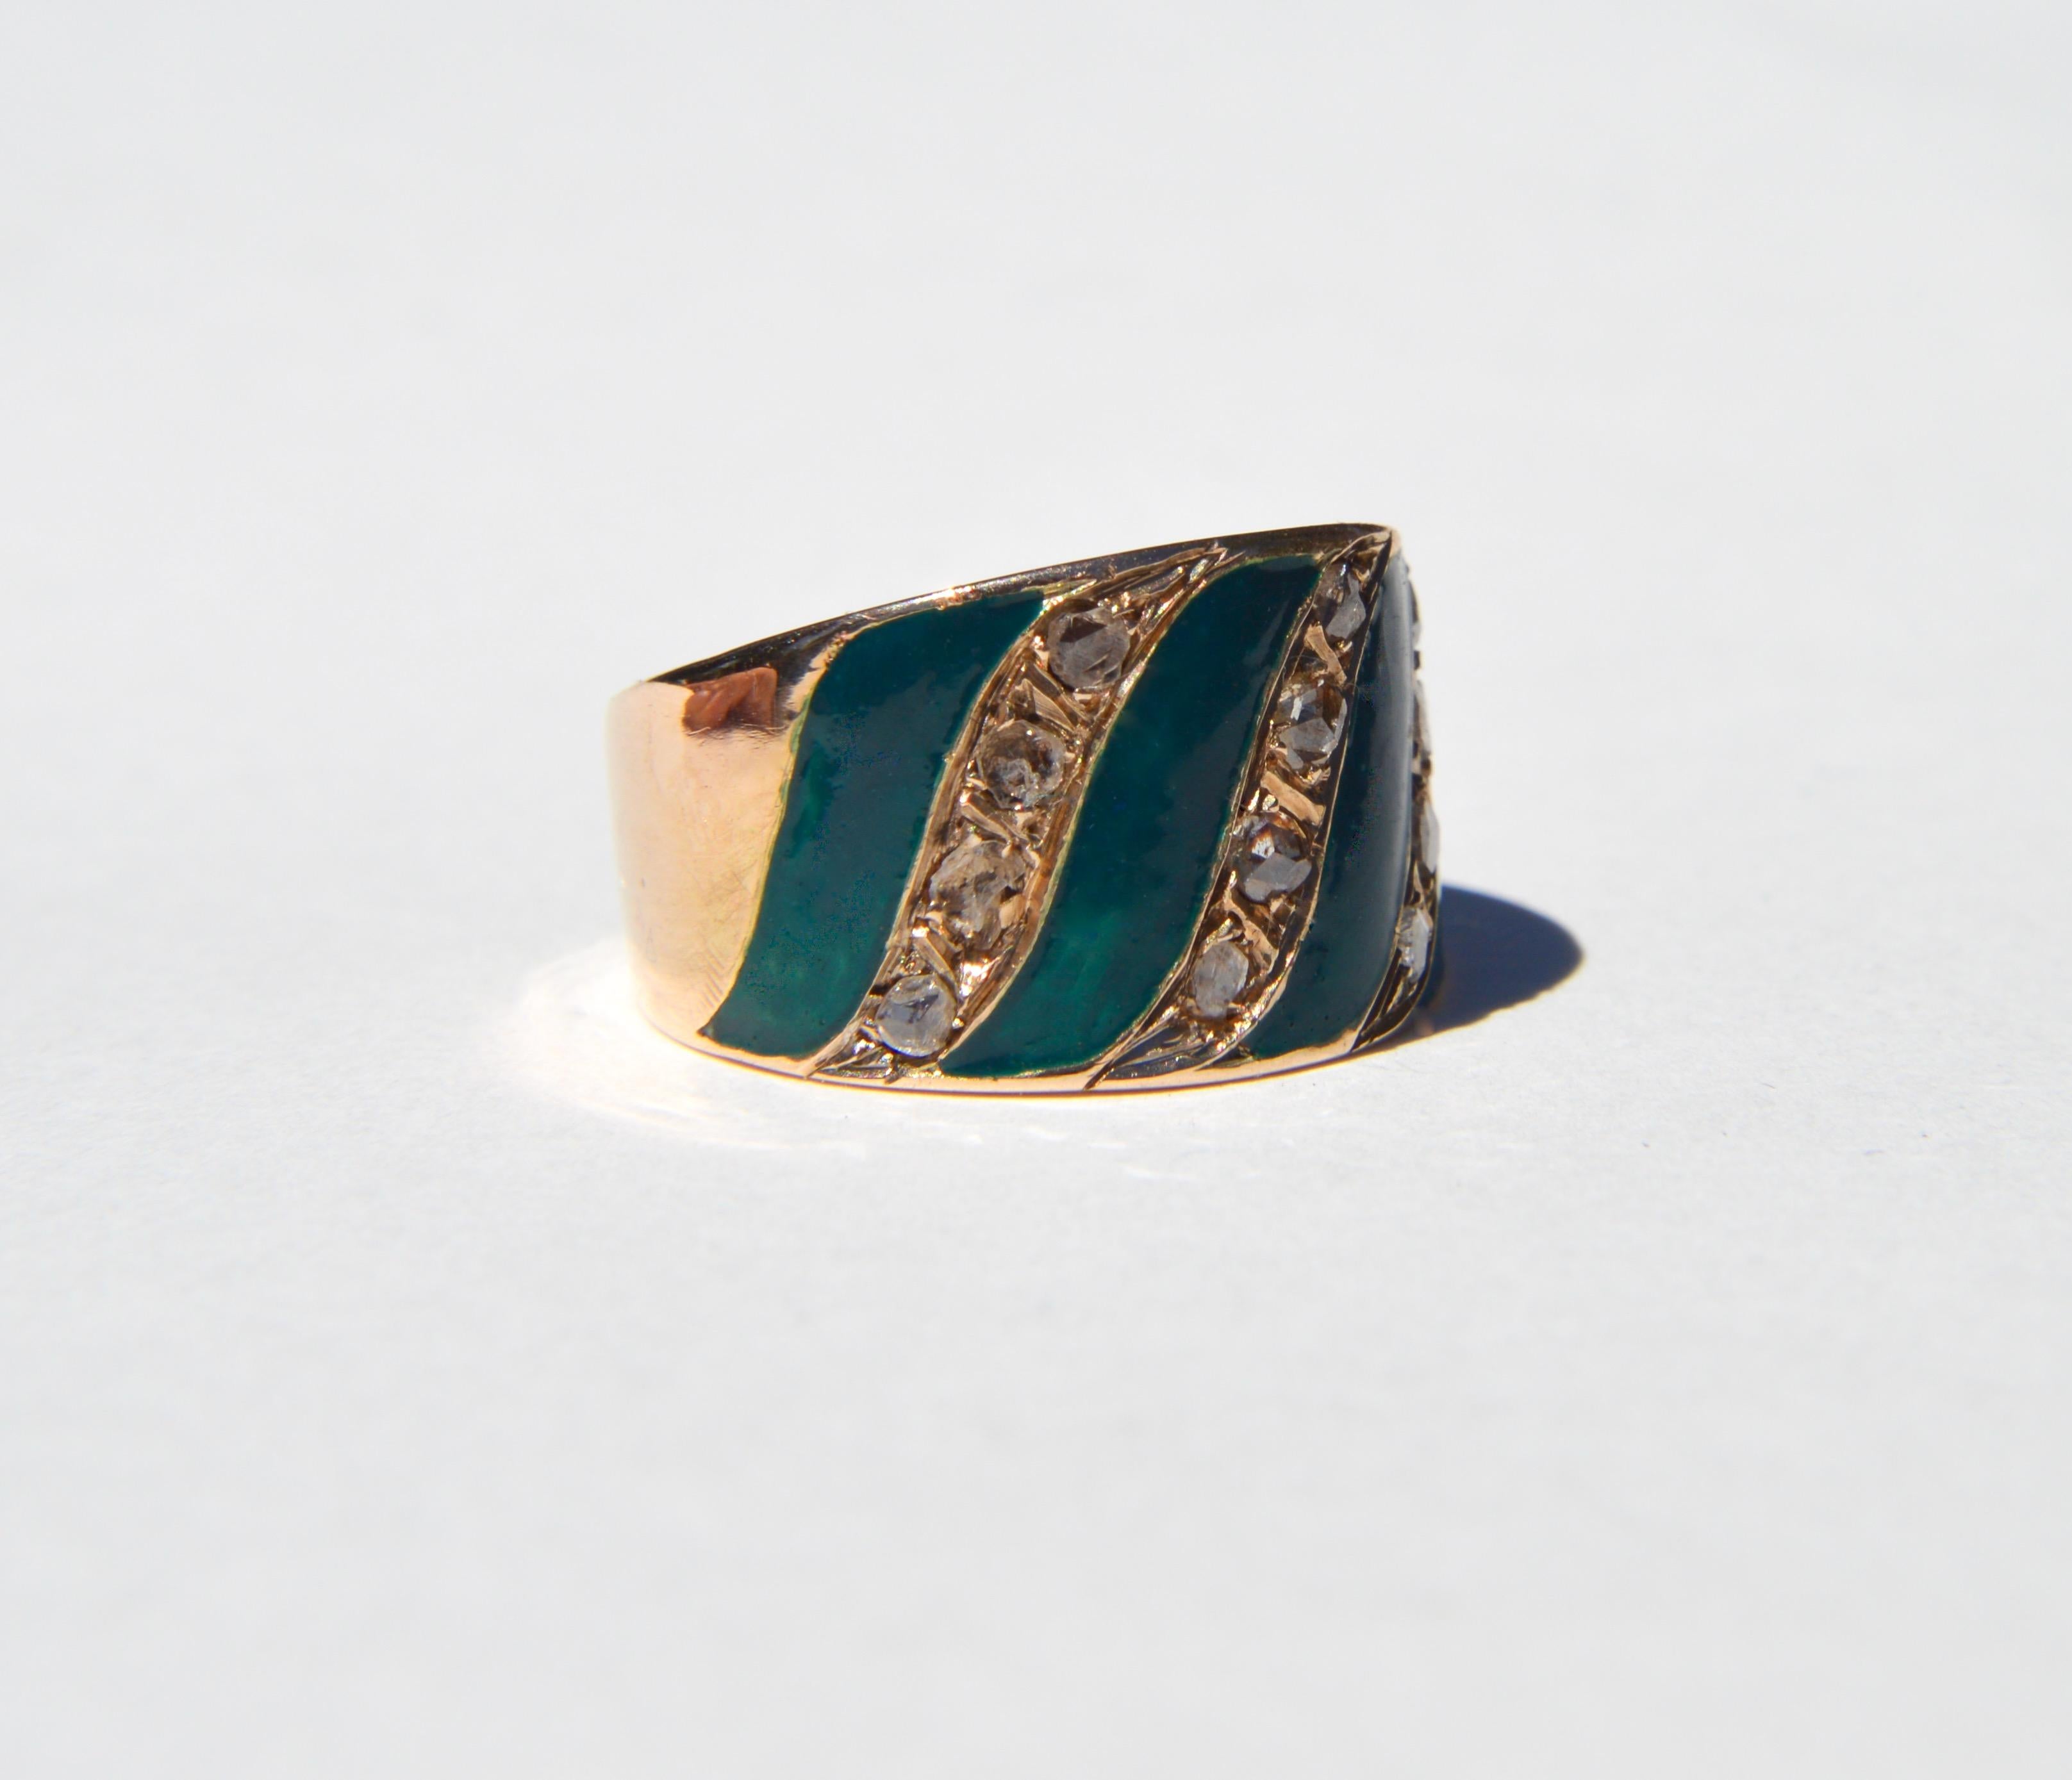 Beautiful and unique antique Edwardian era circa 1900-1905 14K rose gold cigar band style ring. Total of 12 sparkling rosecut diamonds with deep forest green enamel work. Marked as 14K gold. In very good condition. Size 9, can be resized by a